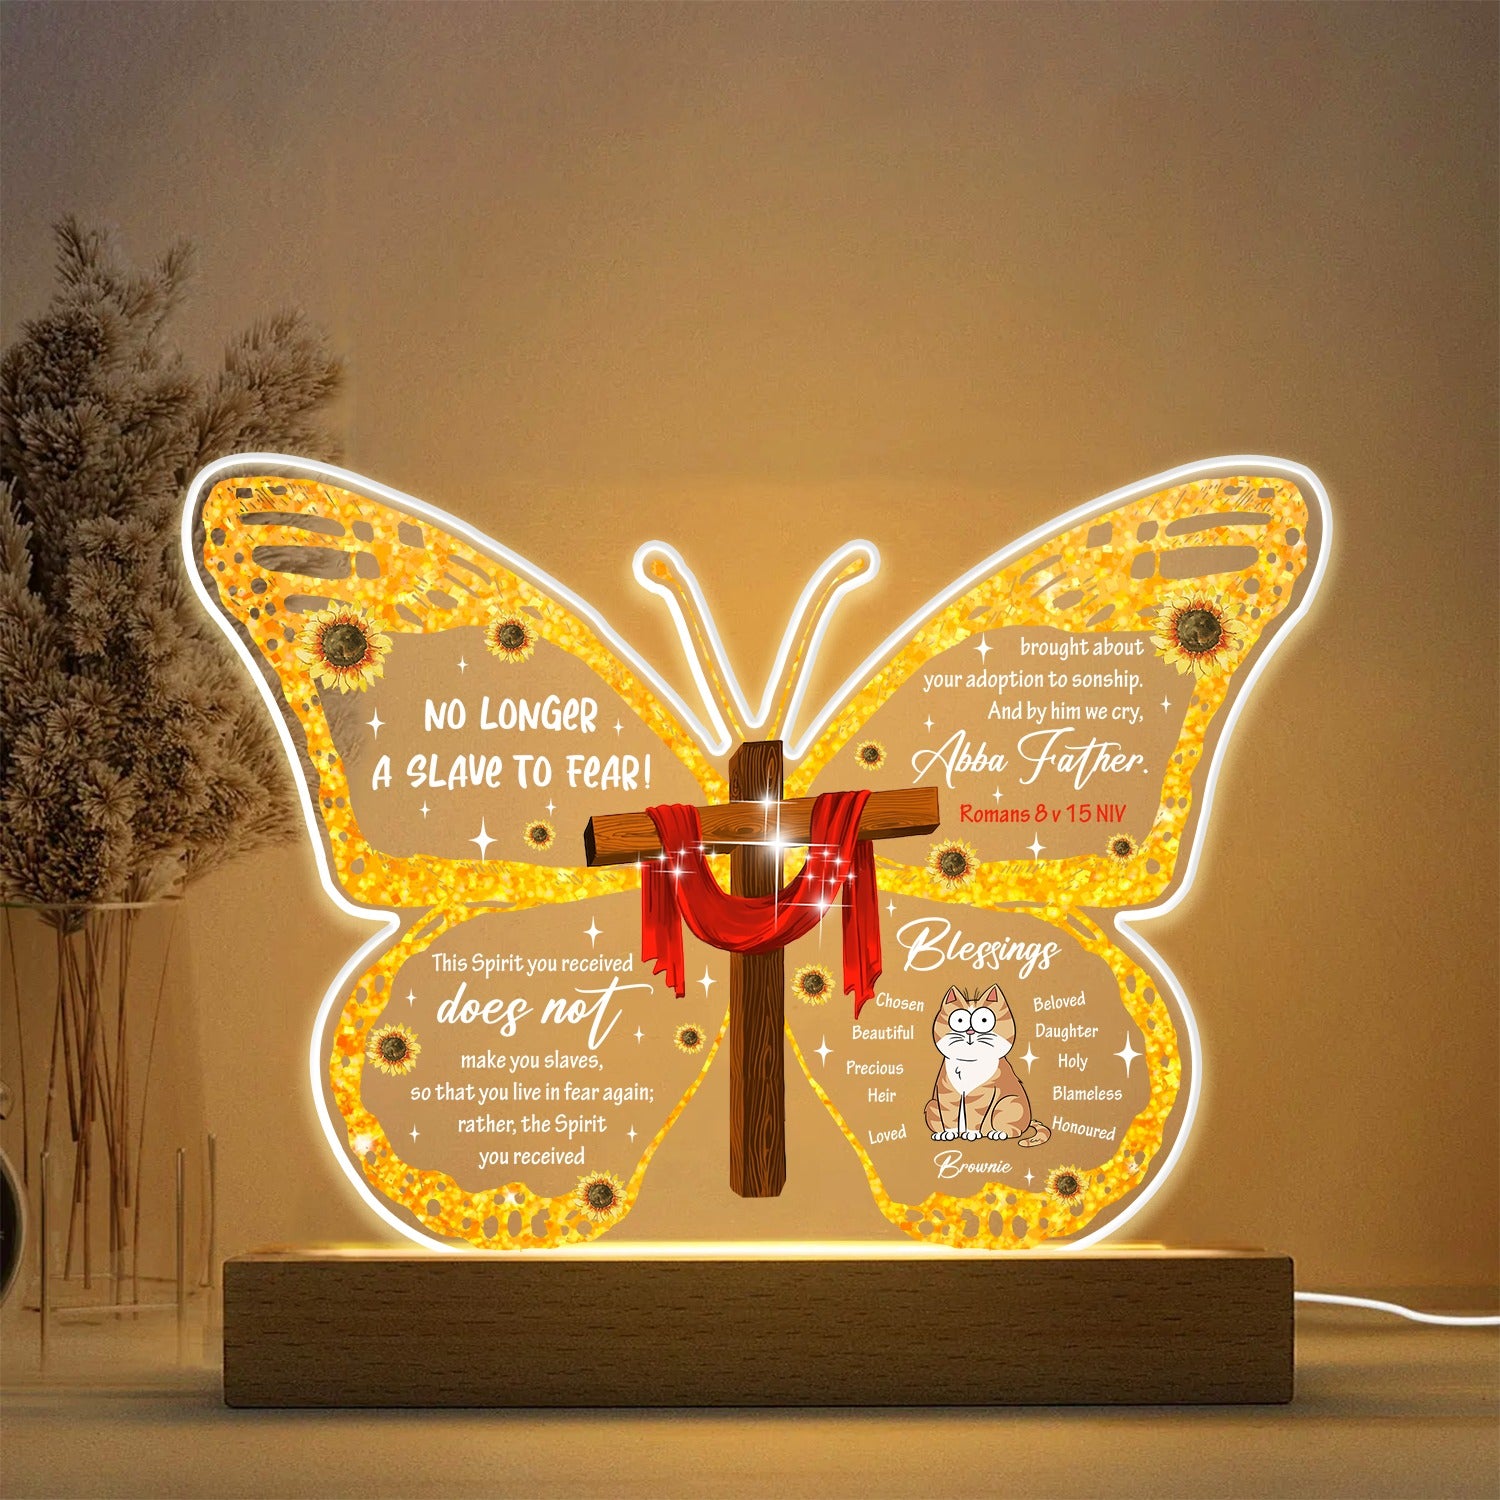 Persoanlized Cat With Romans 8:15 No Longer A Slave To Fear Butterfly Acrylic LED Light Night